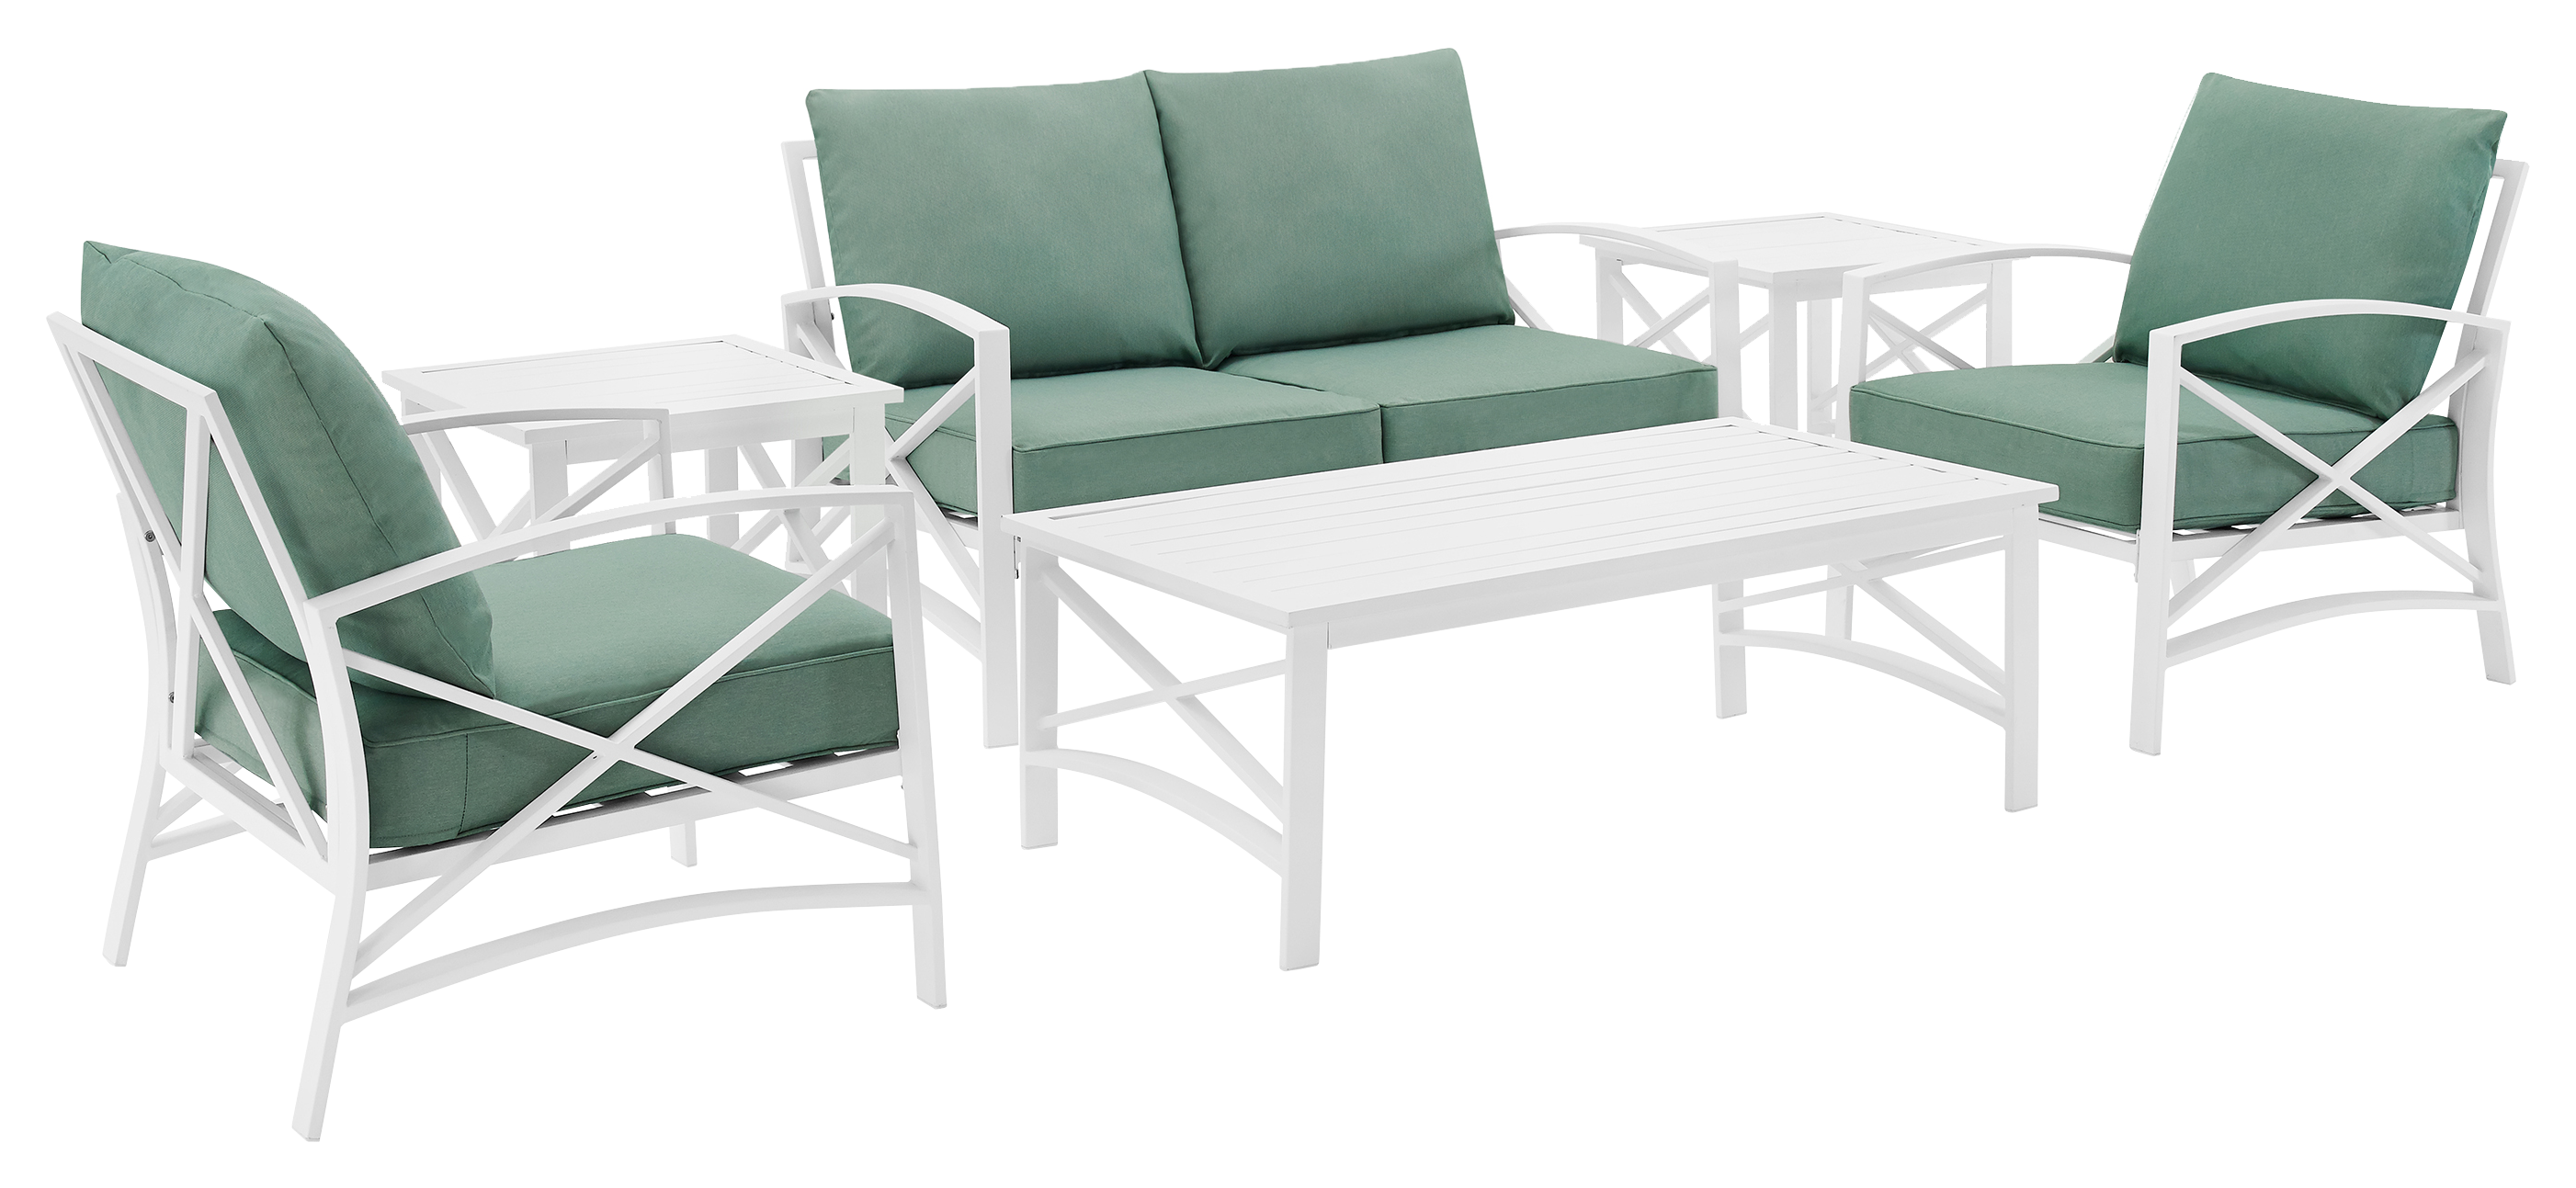 Crosley Kaplan Loveseat, Armchairs, And Tables 6 Piece Outdoor Metal Patio Furniture Set Mist/white